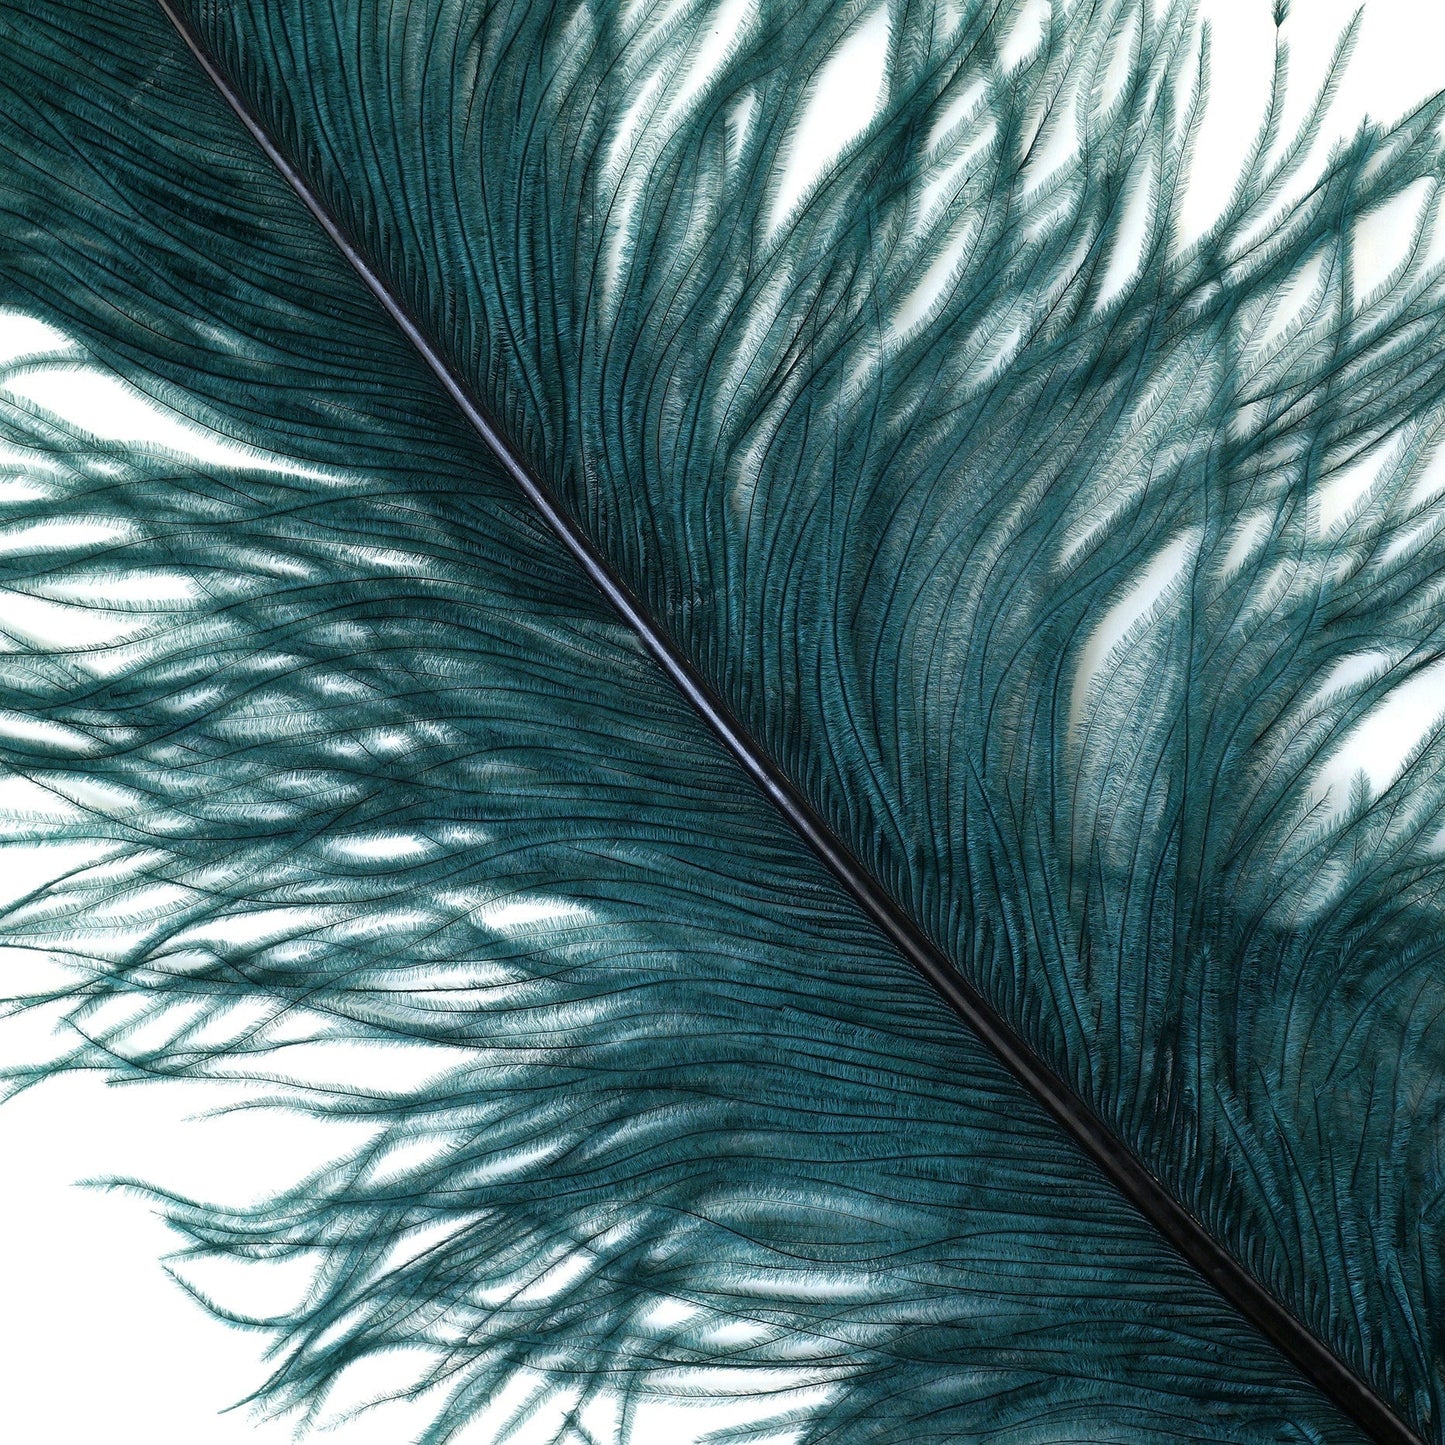 Large Ostrich Feathers - 18-24" Spads - Teal